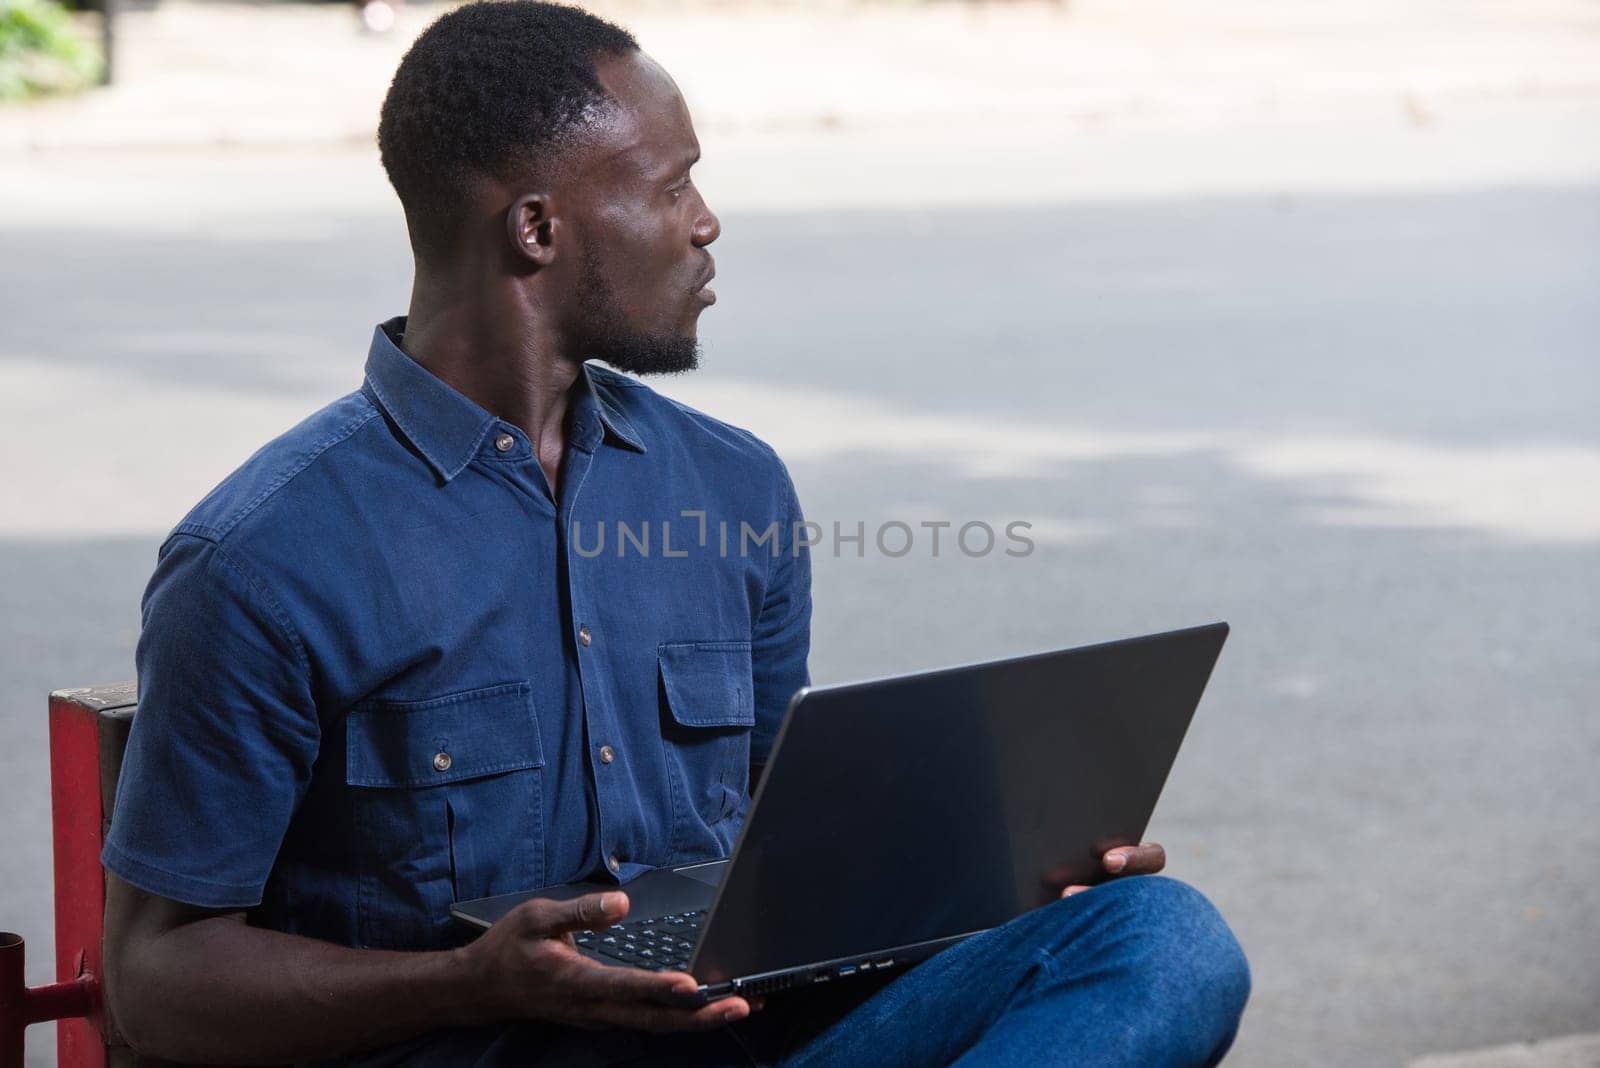 young man sitting outdoors with laptop watching something surprised.